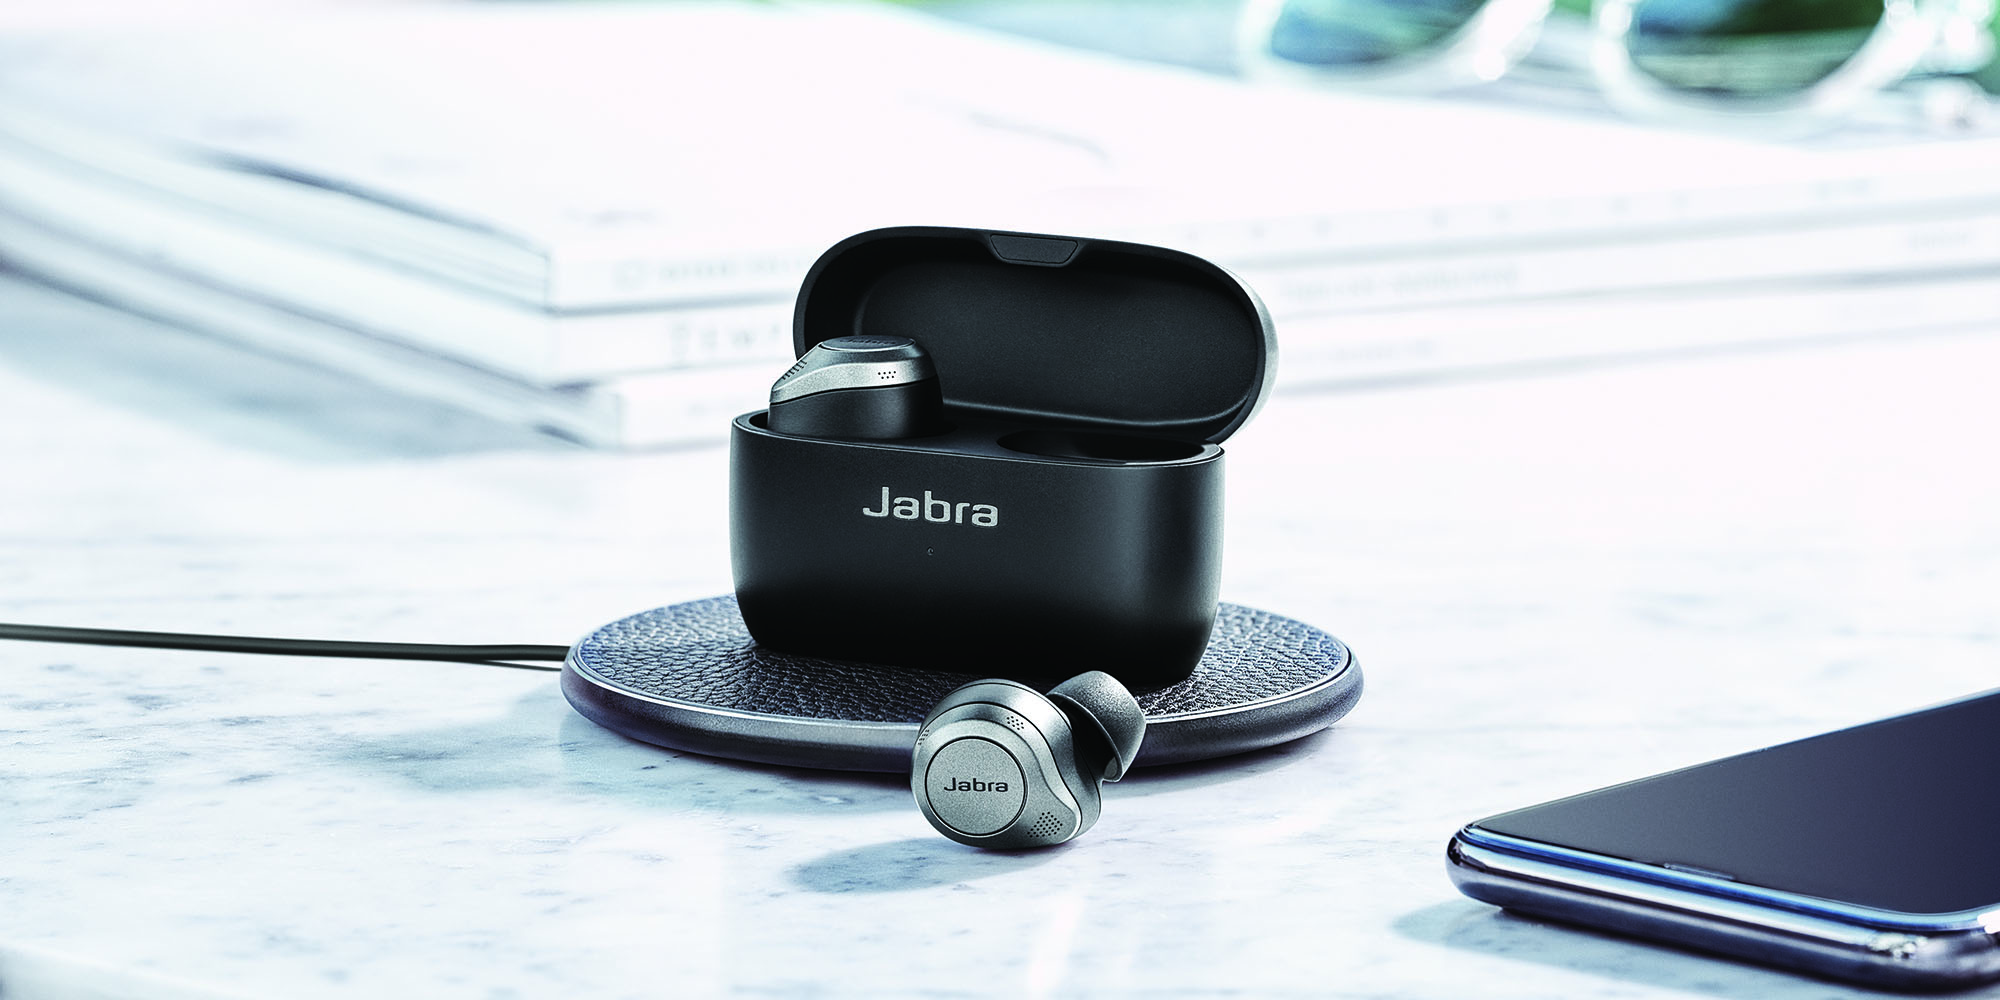 Jabra Elite 85t brings noise cancellation and Qi charging - 9to5Google